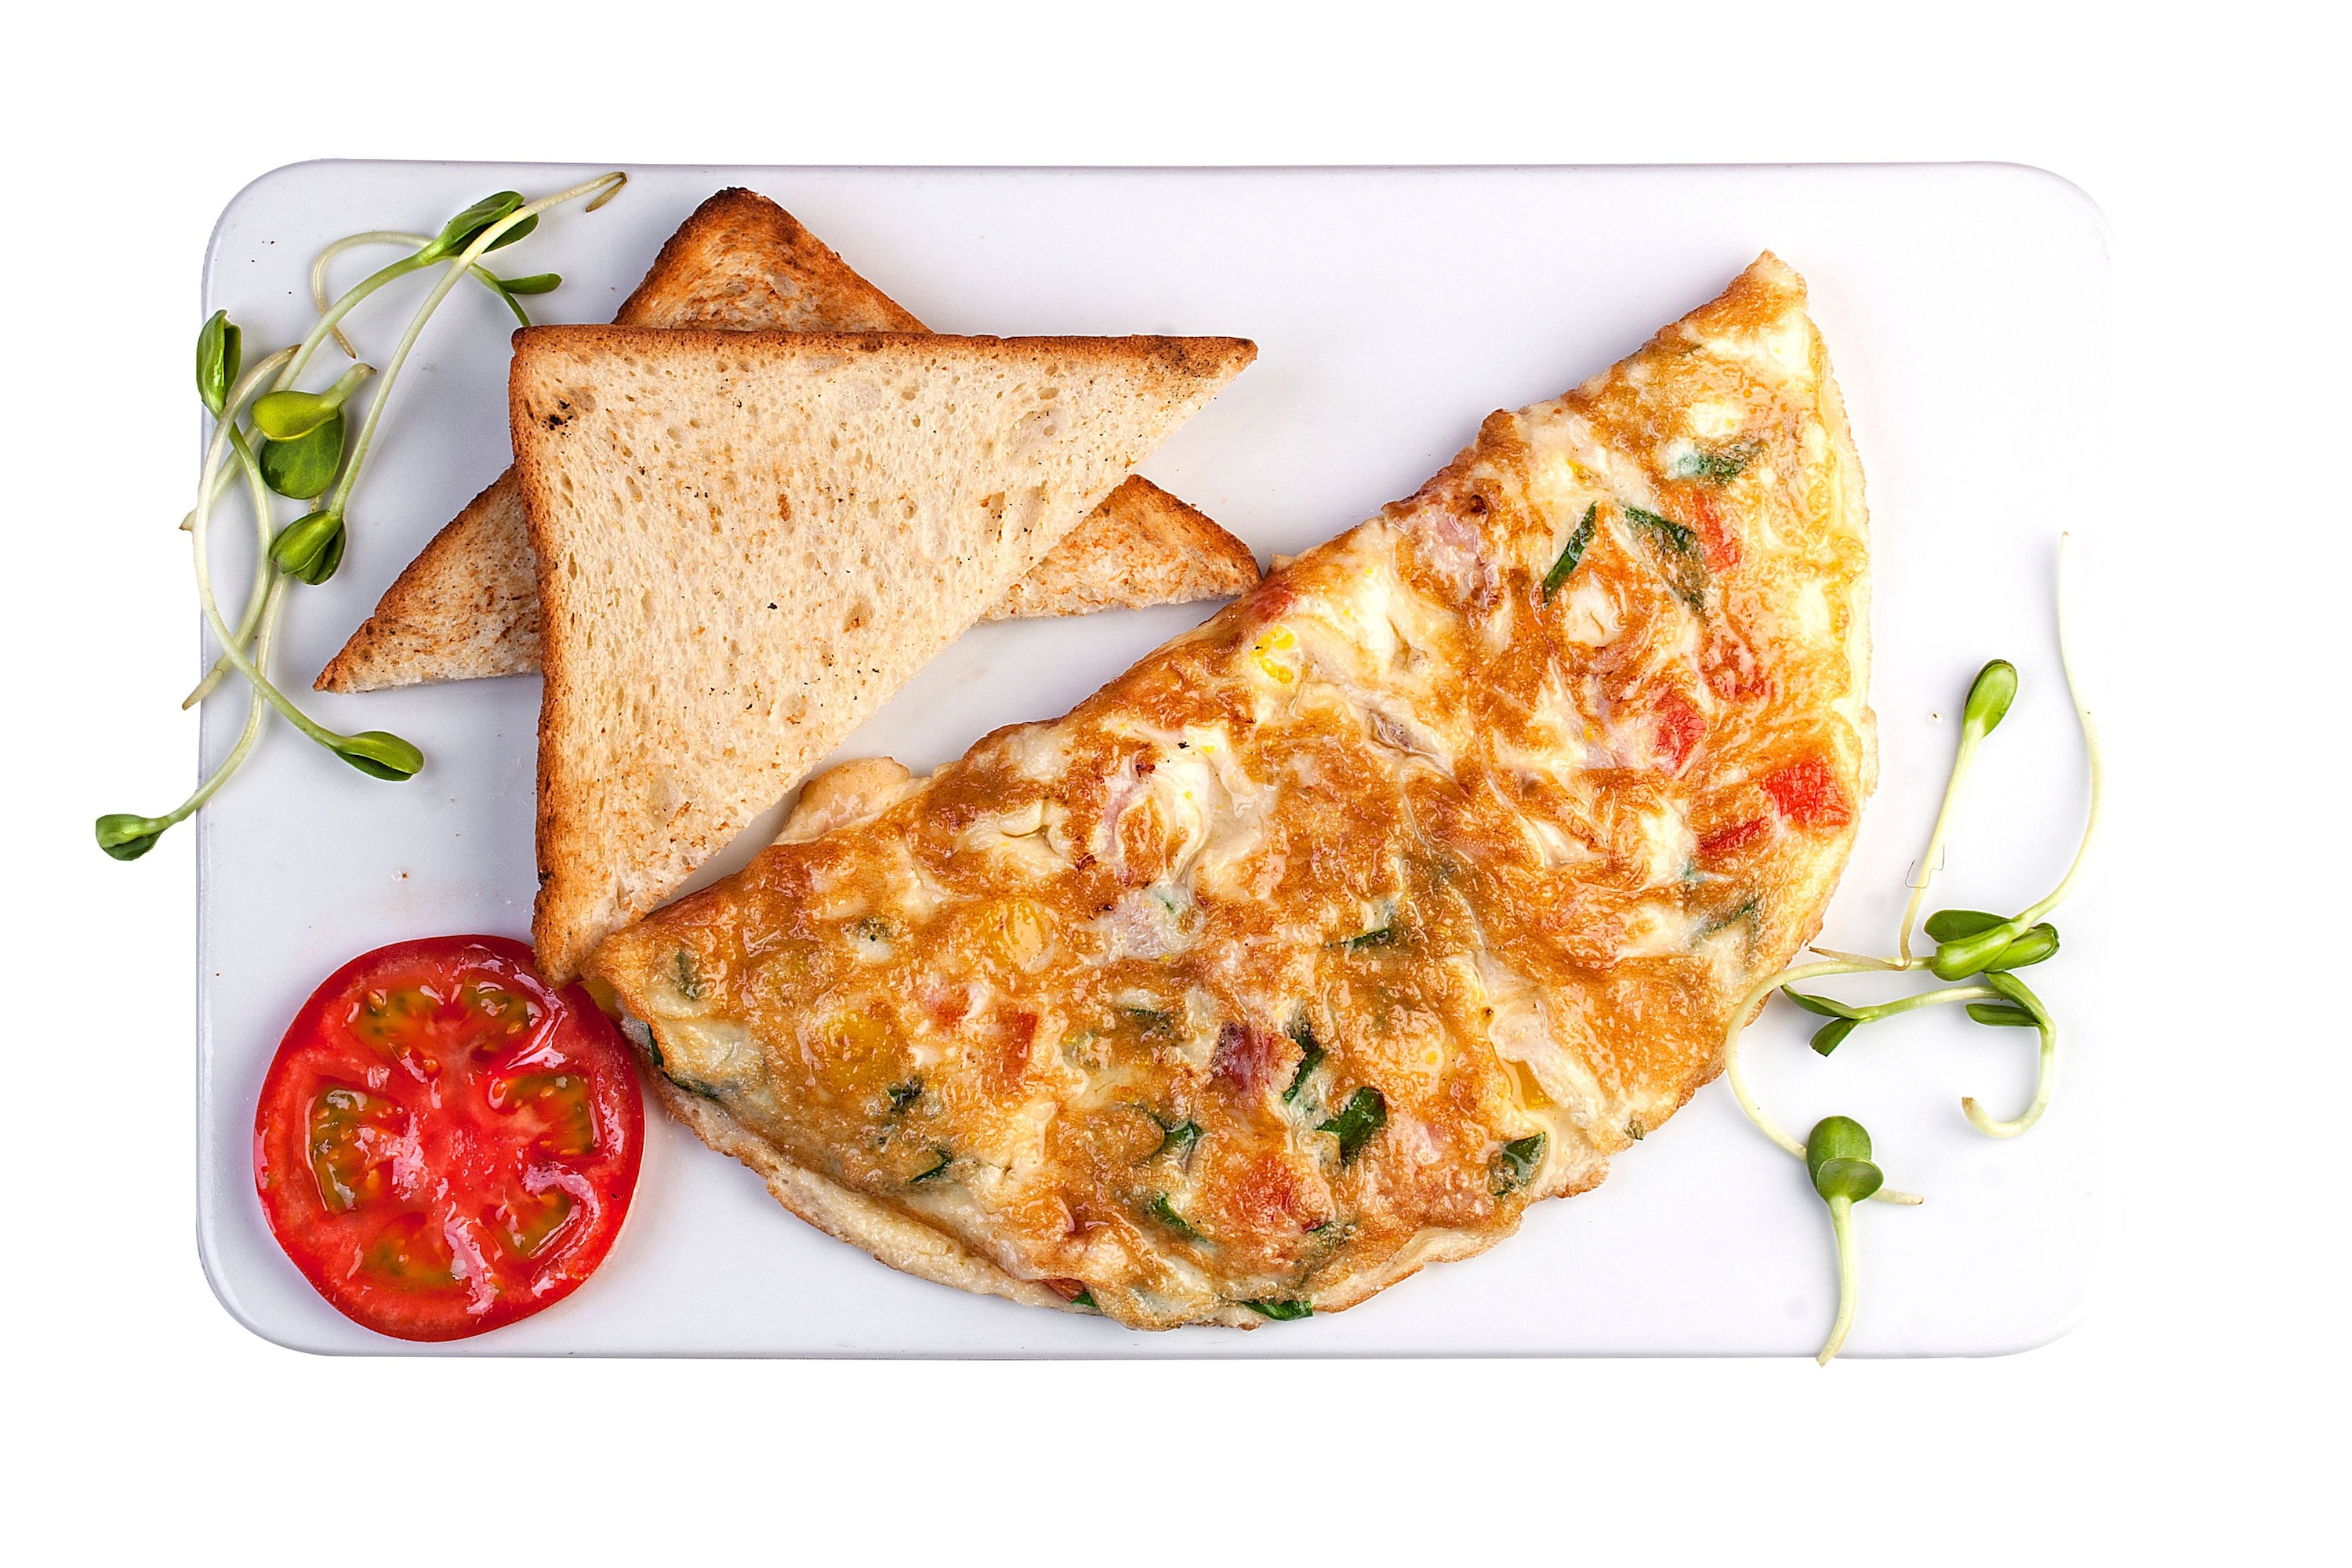 Omelette con Queso y Tomate